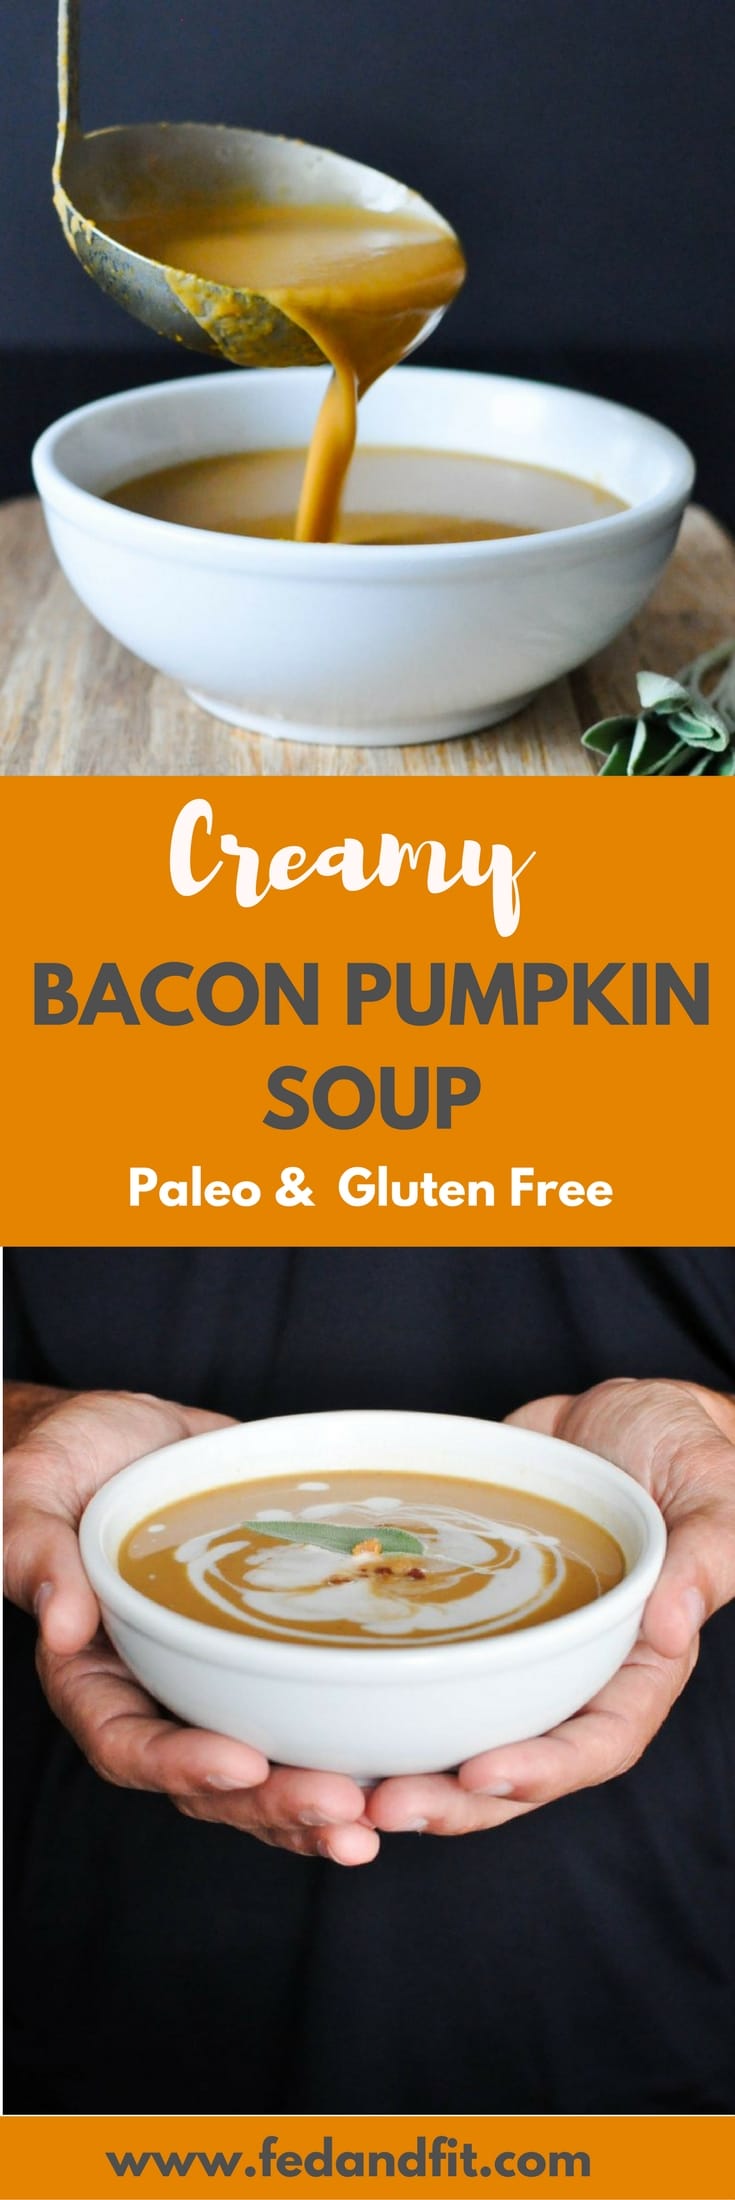 This Paleo Bacon Pumpkin Soup is totally dairy free and made creamy with coconut milk. It is the perfect healthy and comforting winter meal that still feels indulgent!